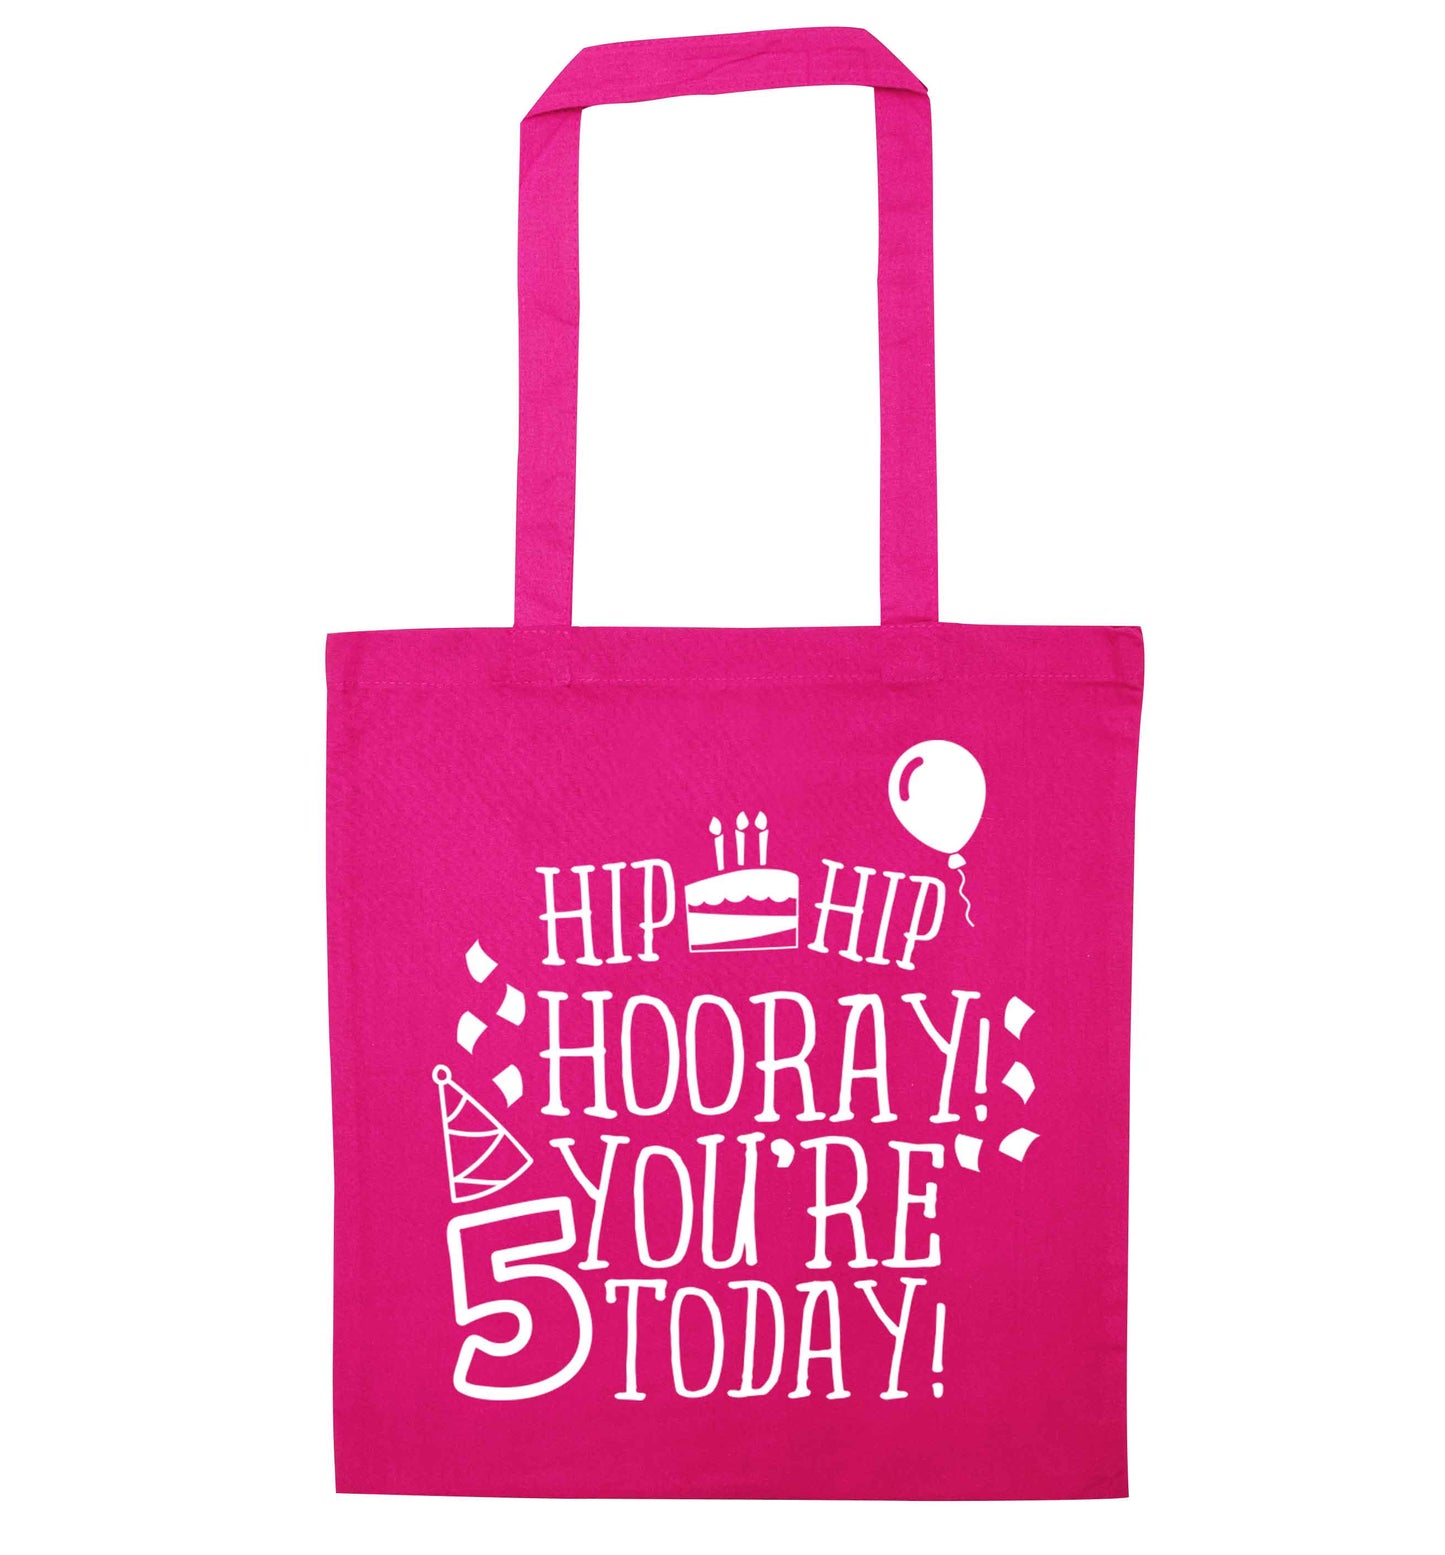 Hip hip hooray you're five today! pink tote bag